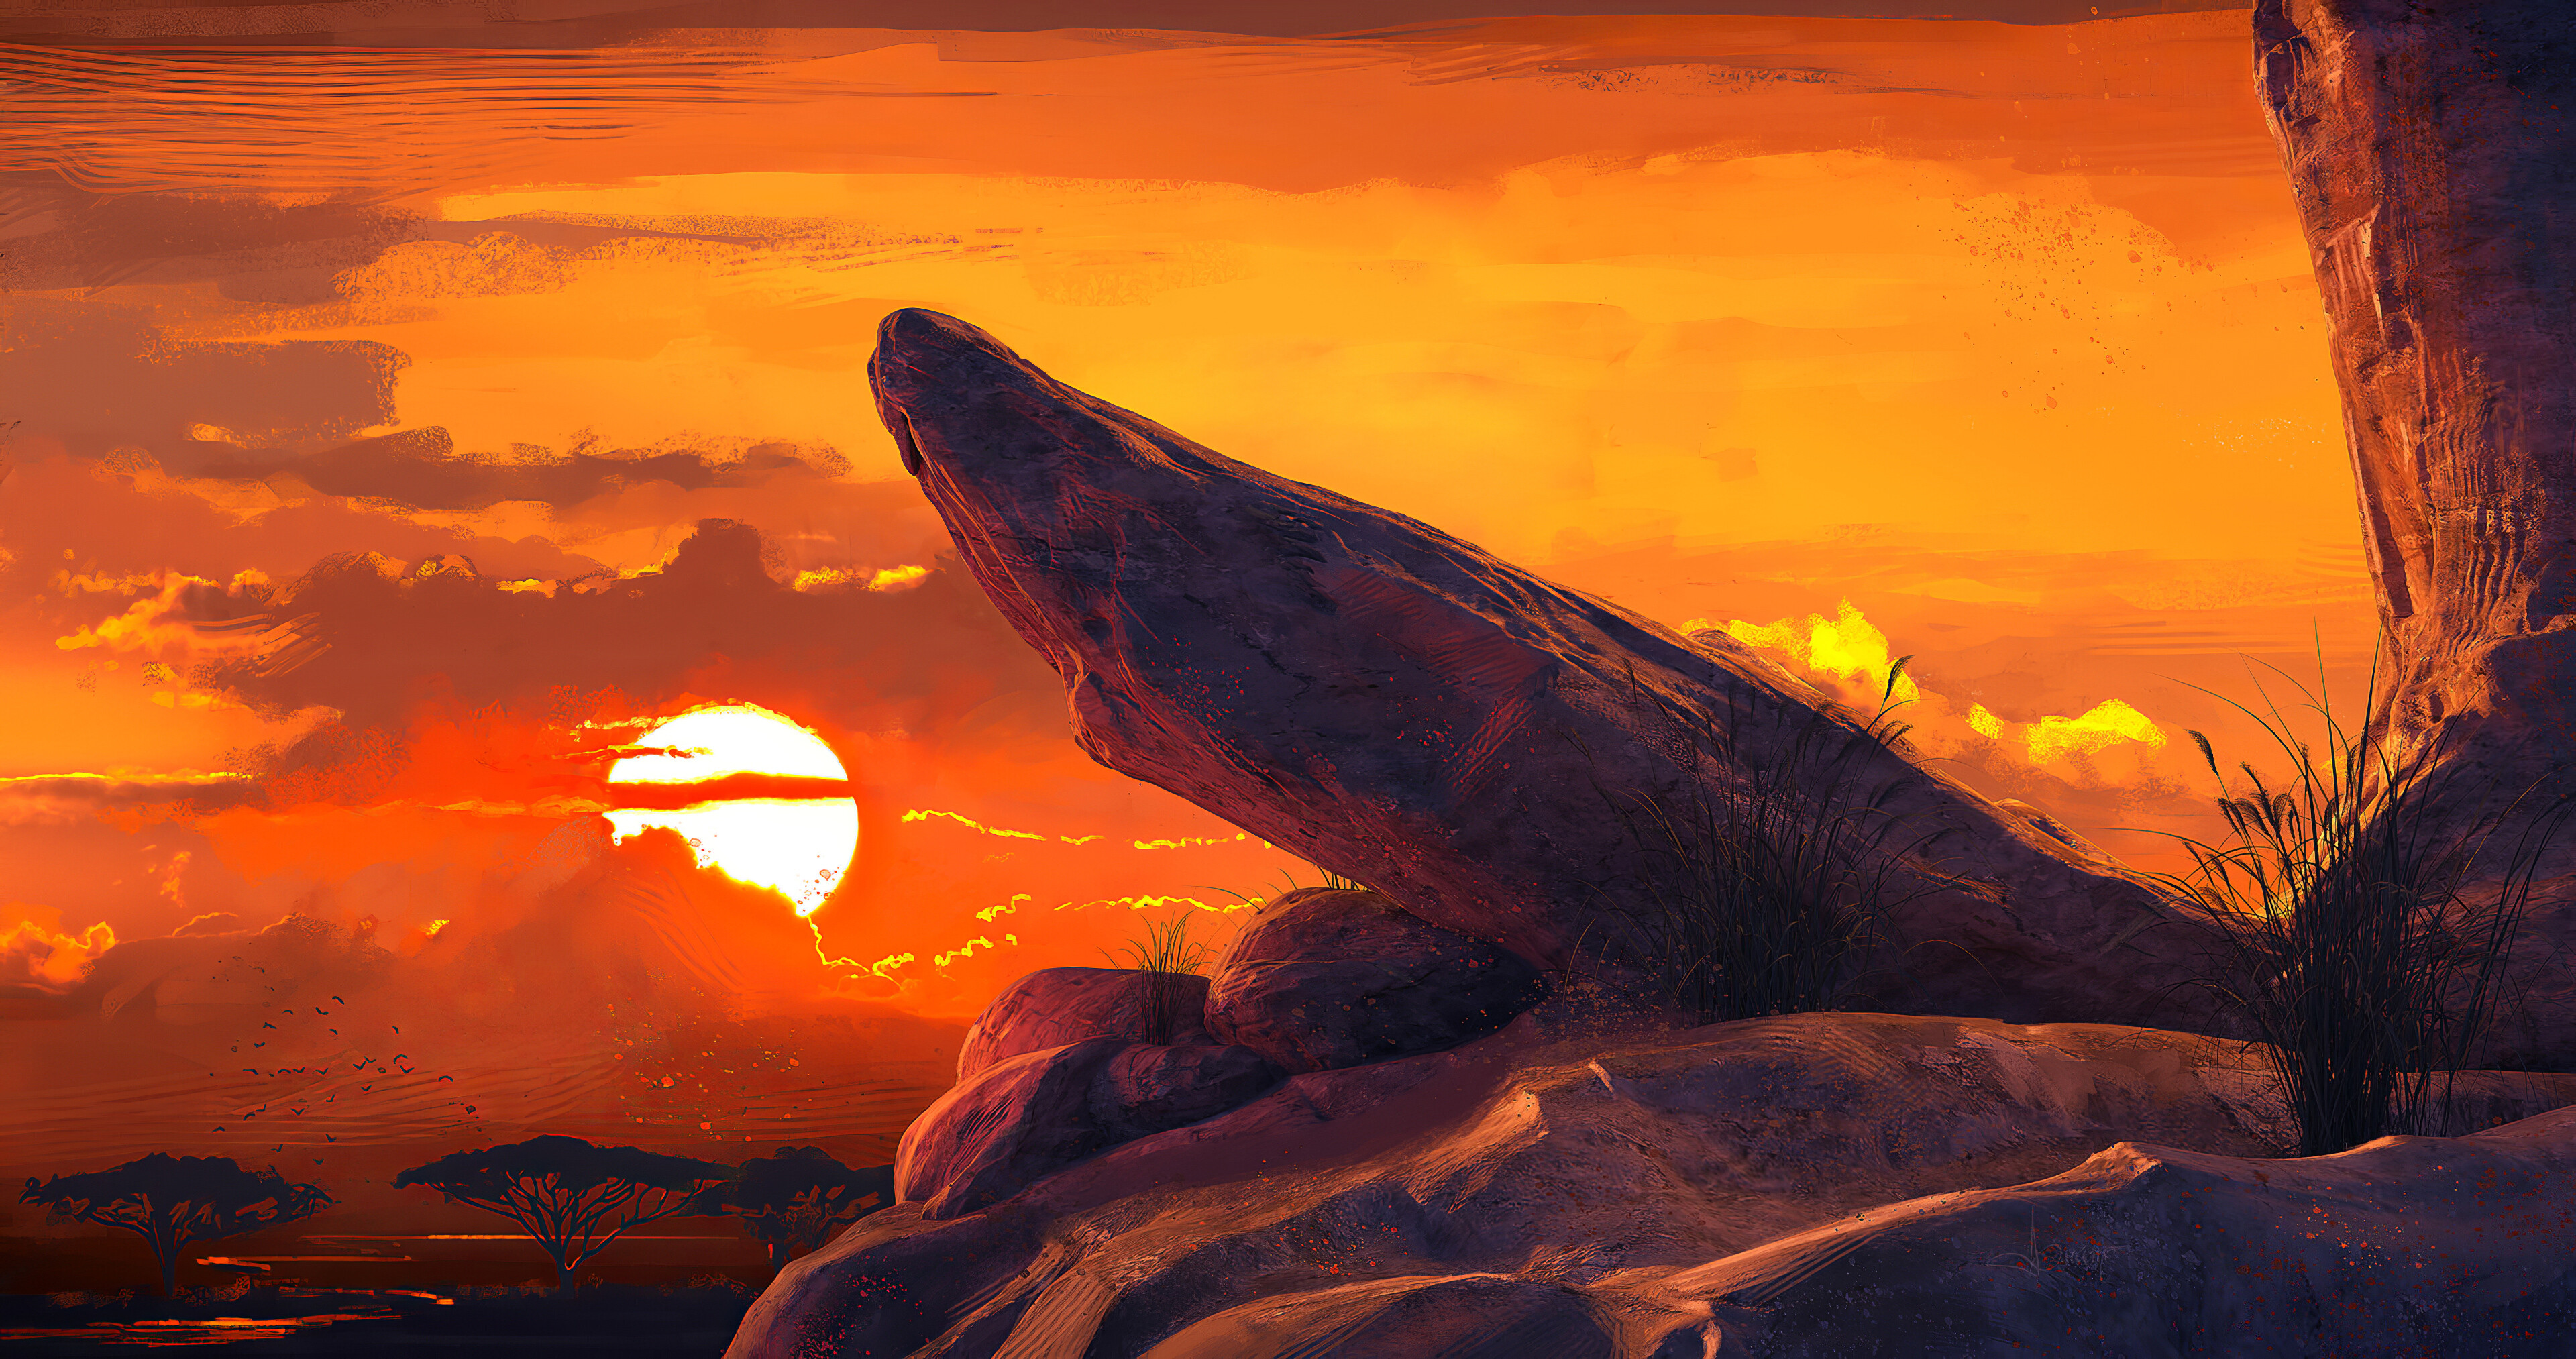 The Lion King: Pride Rock, A rock formation in the Pride Lands. 3840x2030 HD Wallpaper.